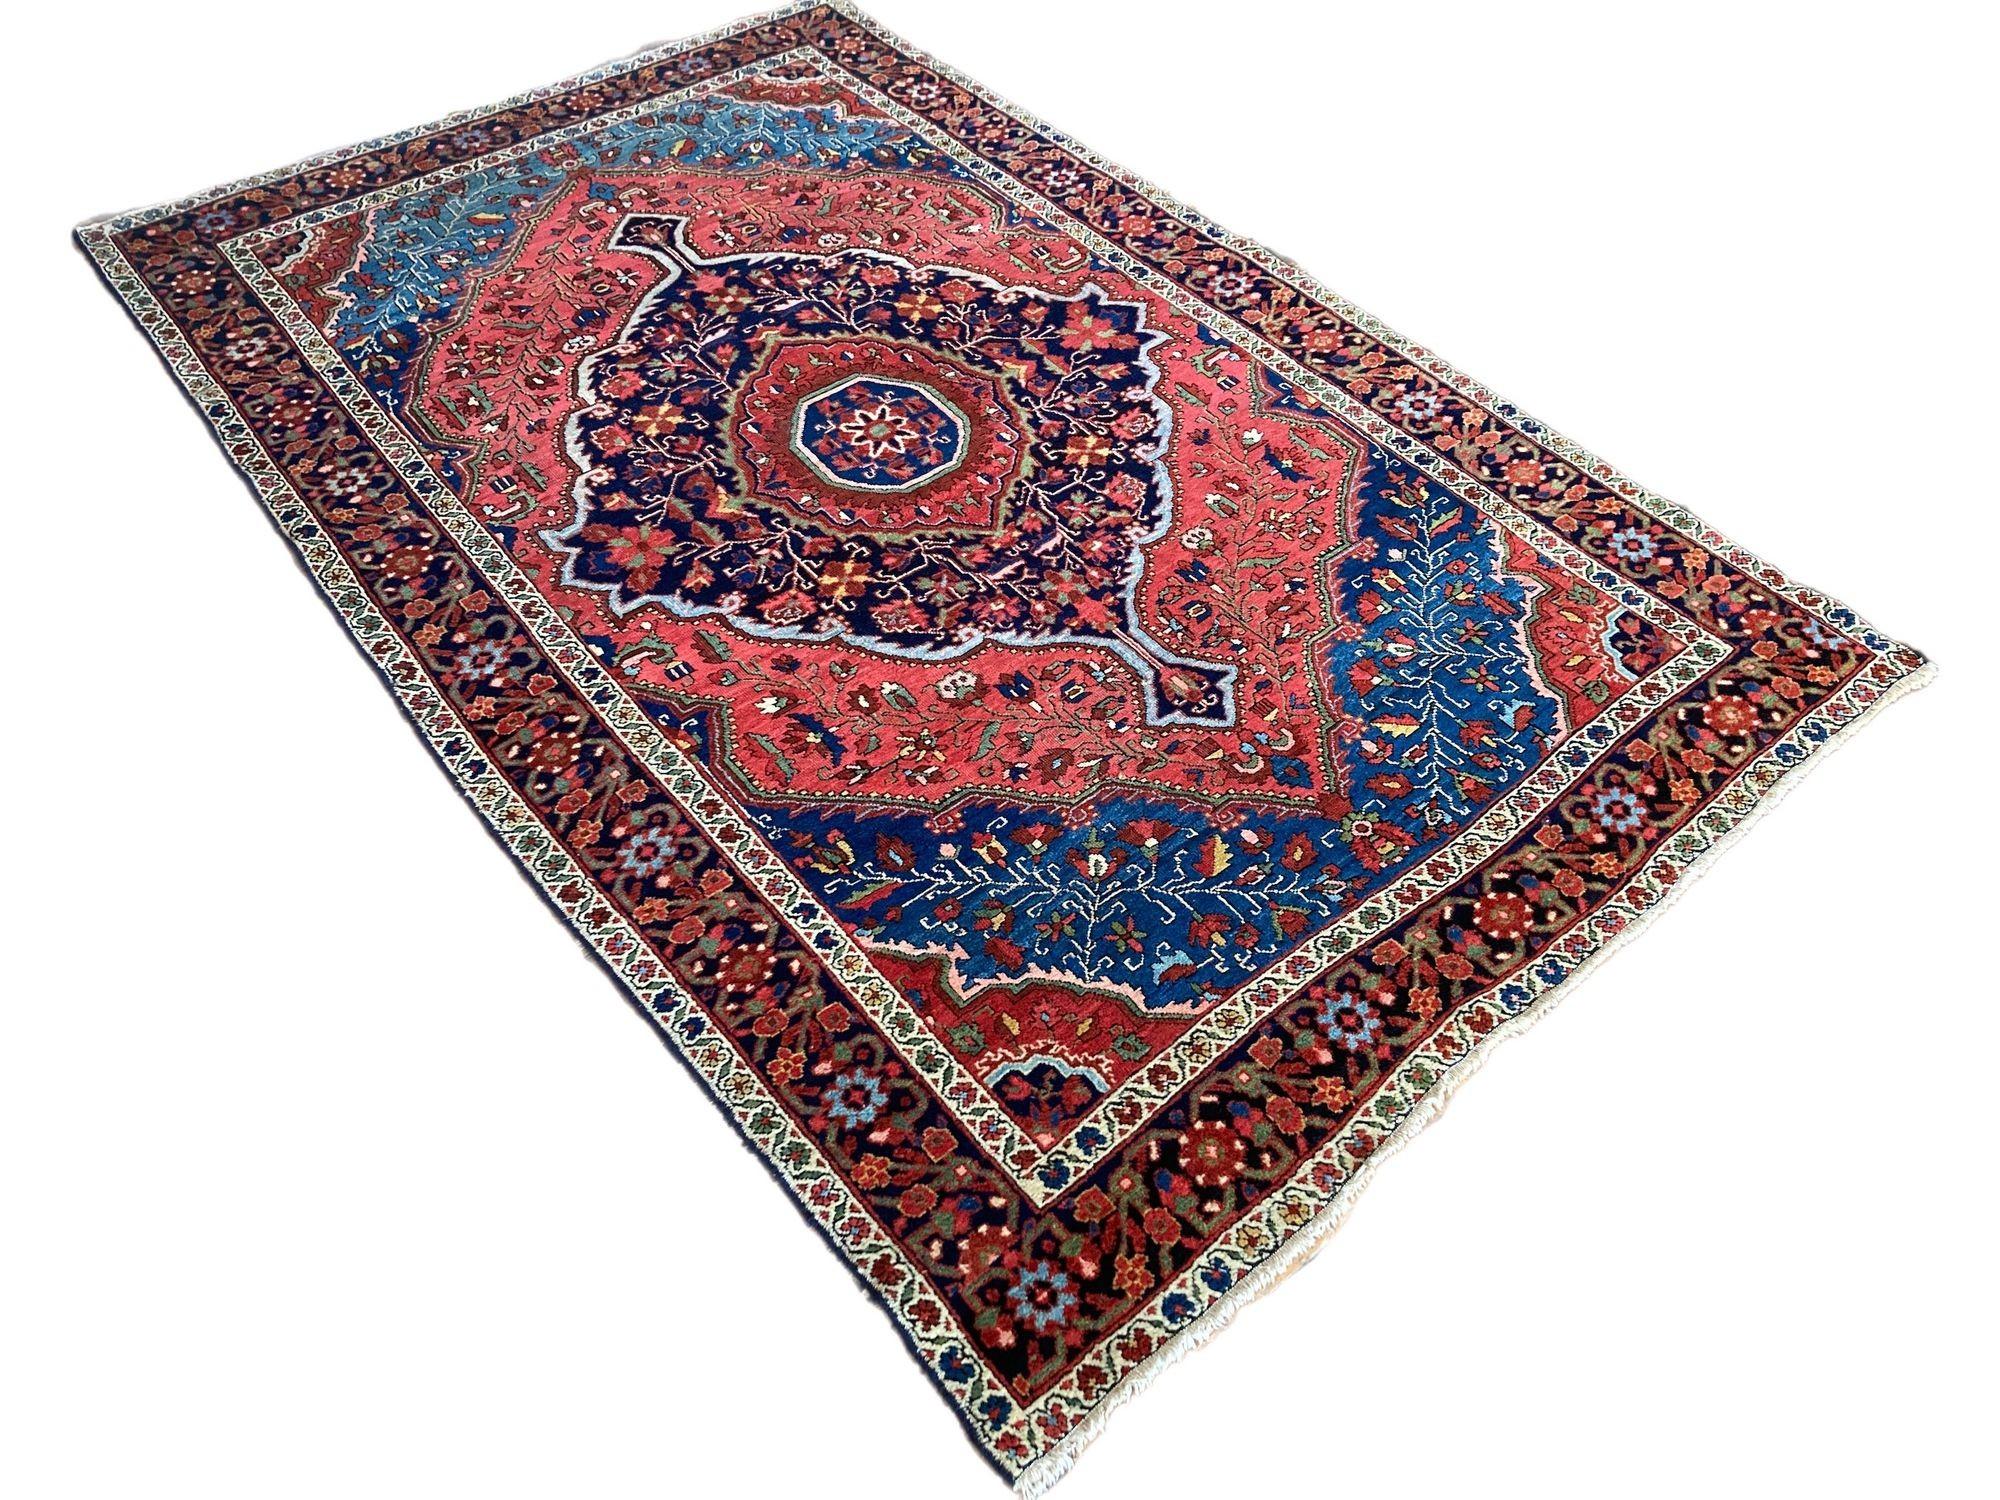 Antique Sarouk Ferahan Rug 2.20m X 1.42m In Good Condition For Sale In St. Albans, GB